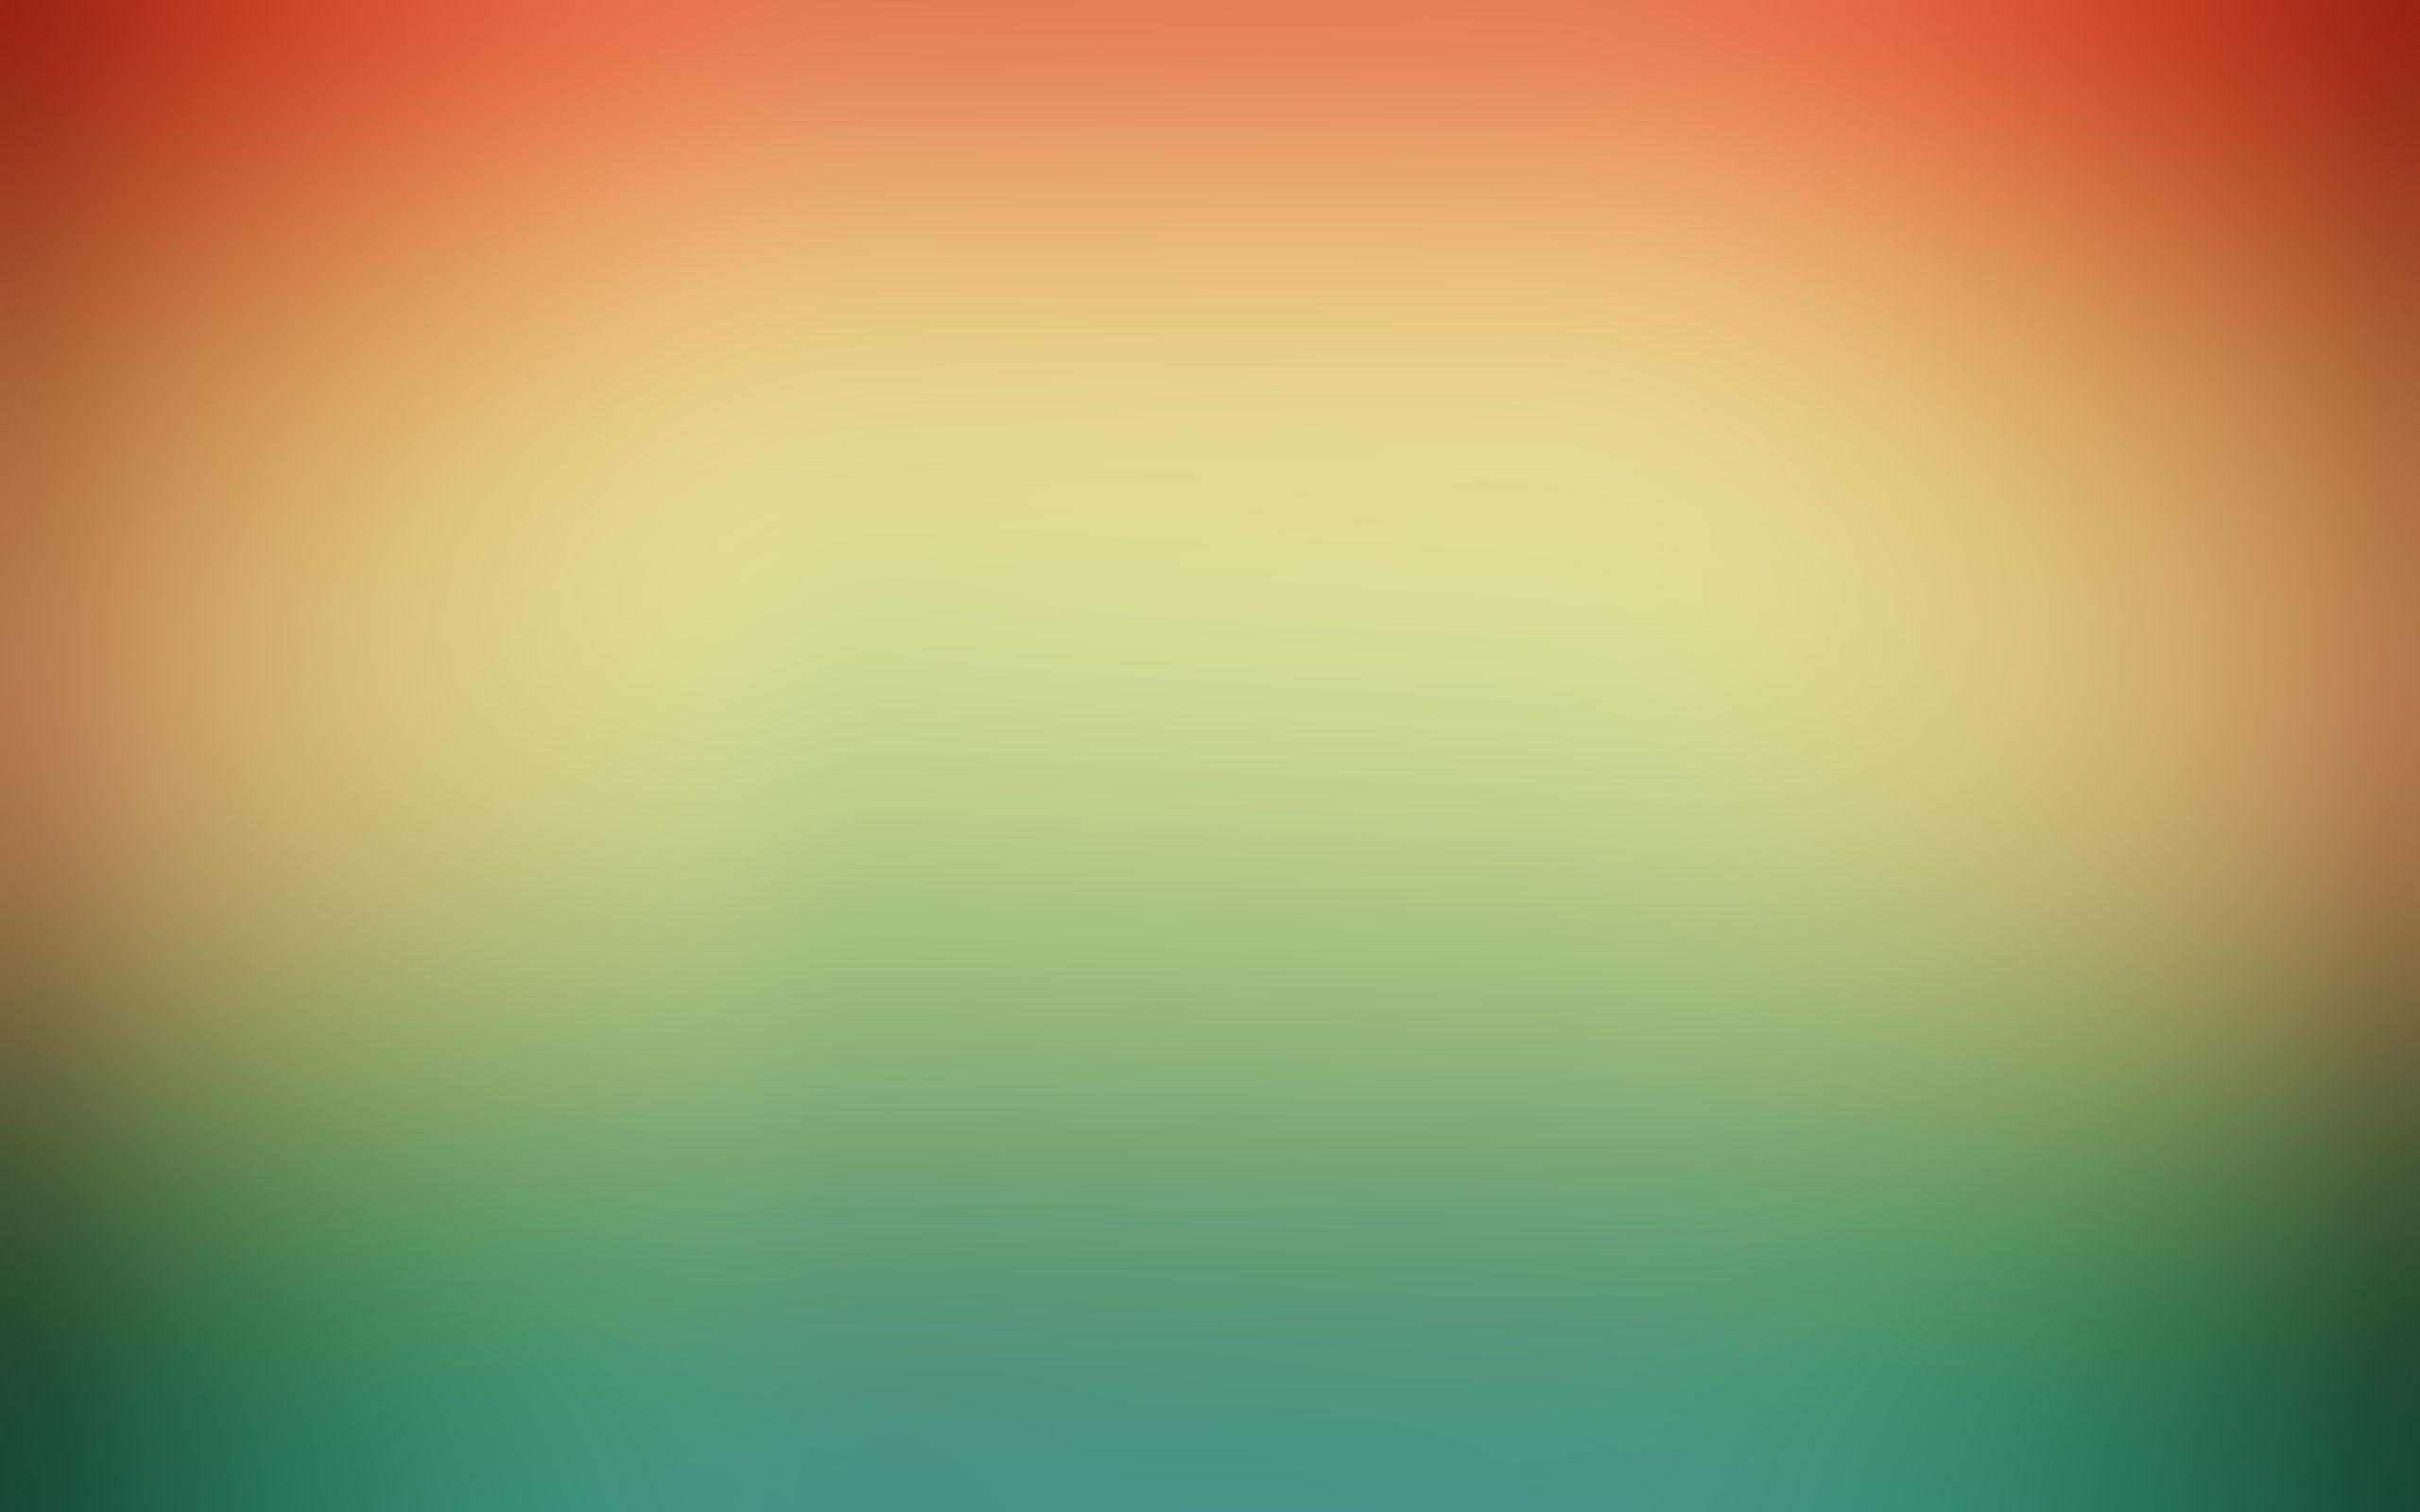 Gradient wallpaper for your Android smartphone or tablet